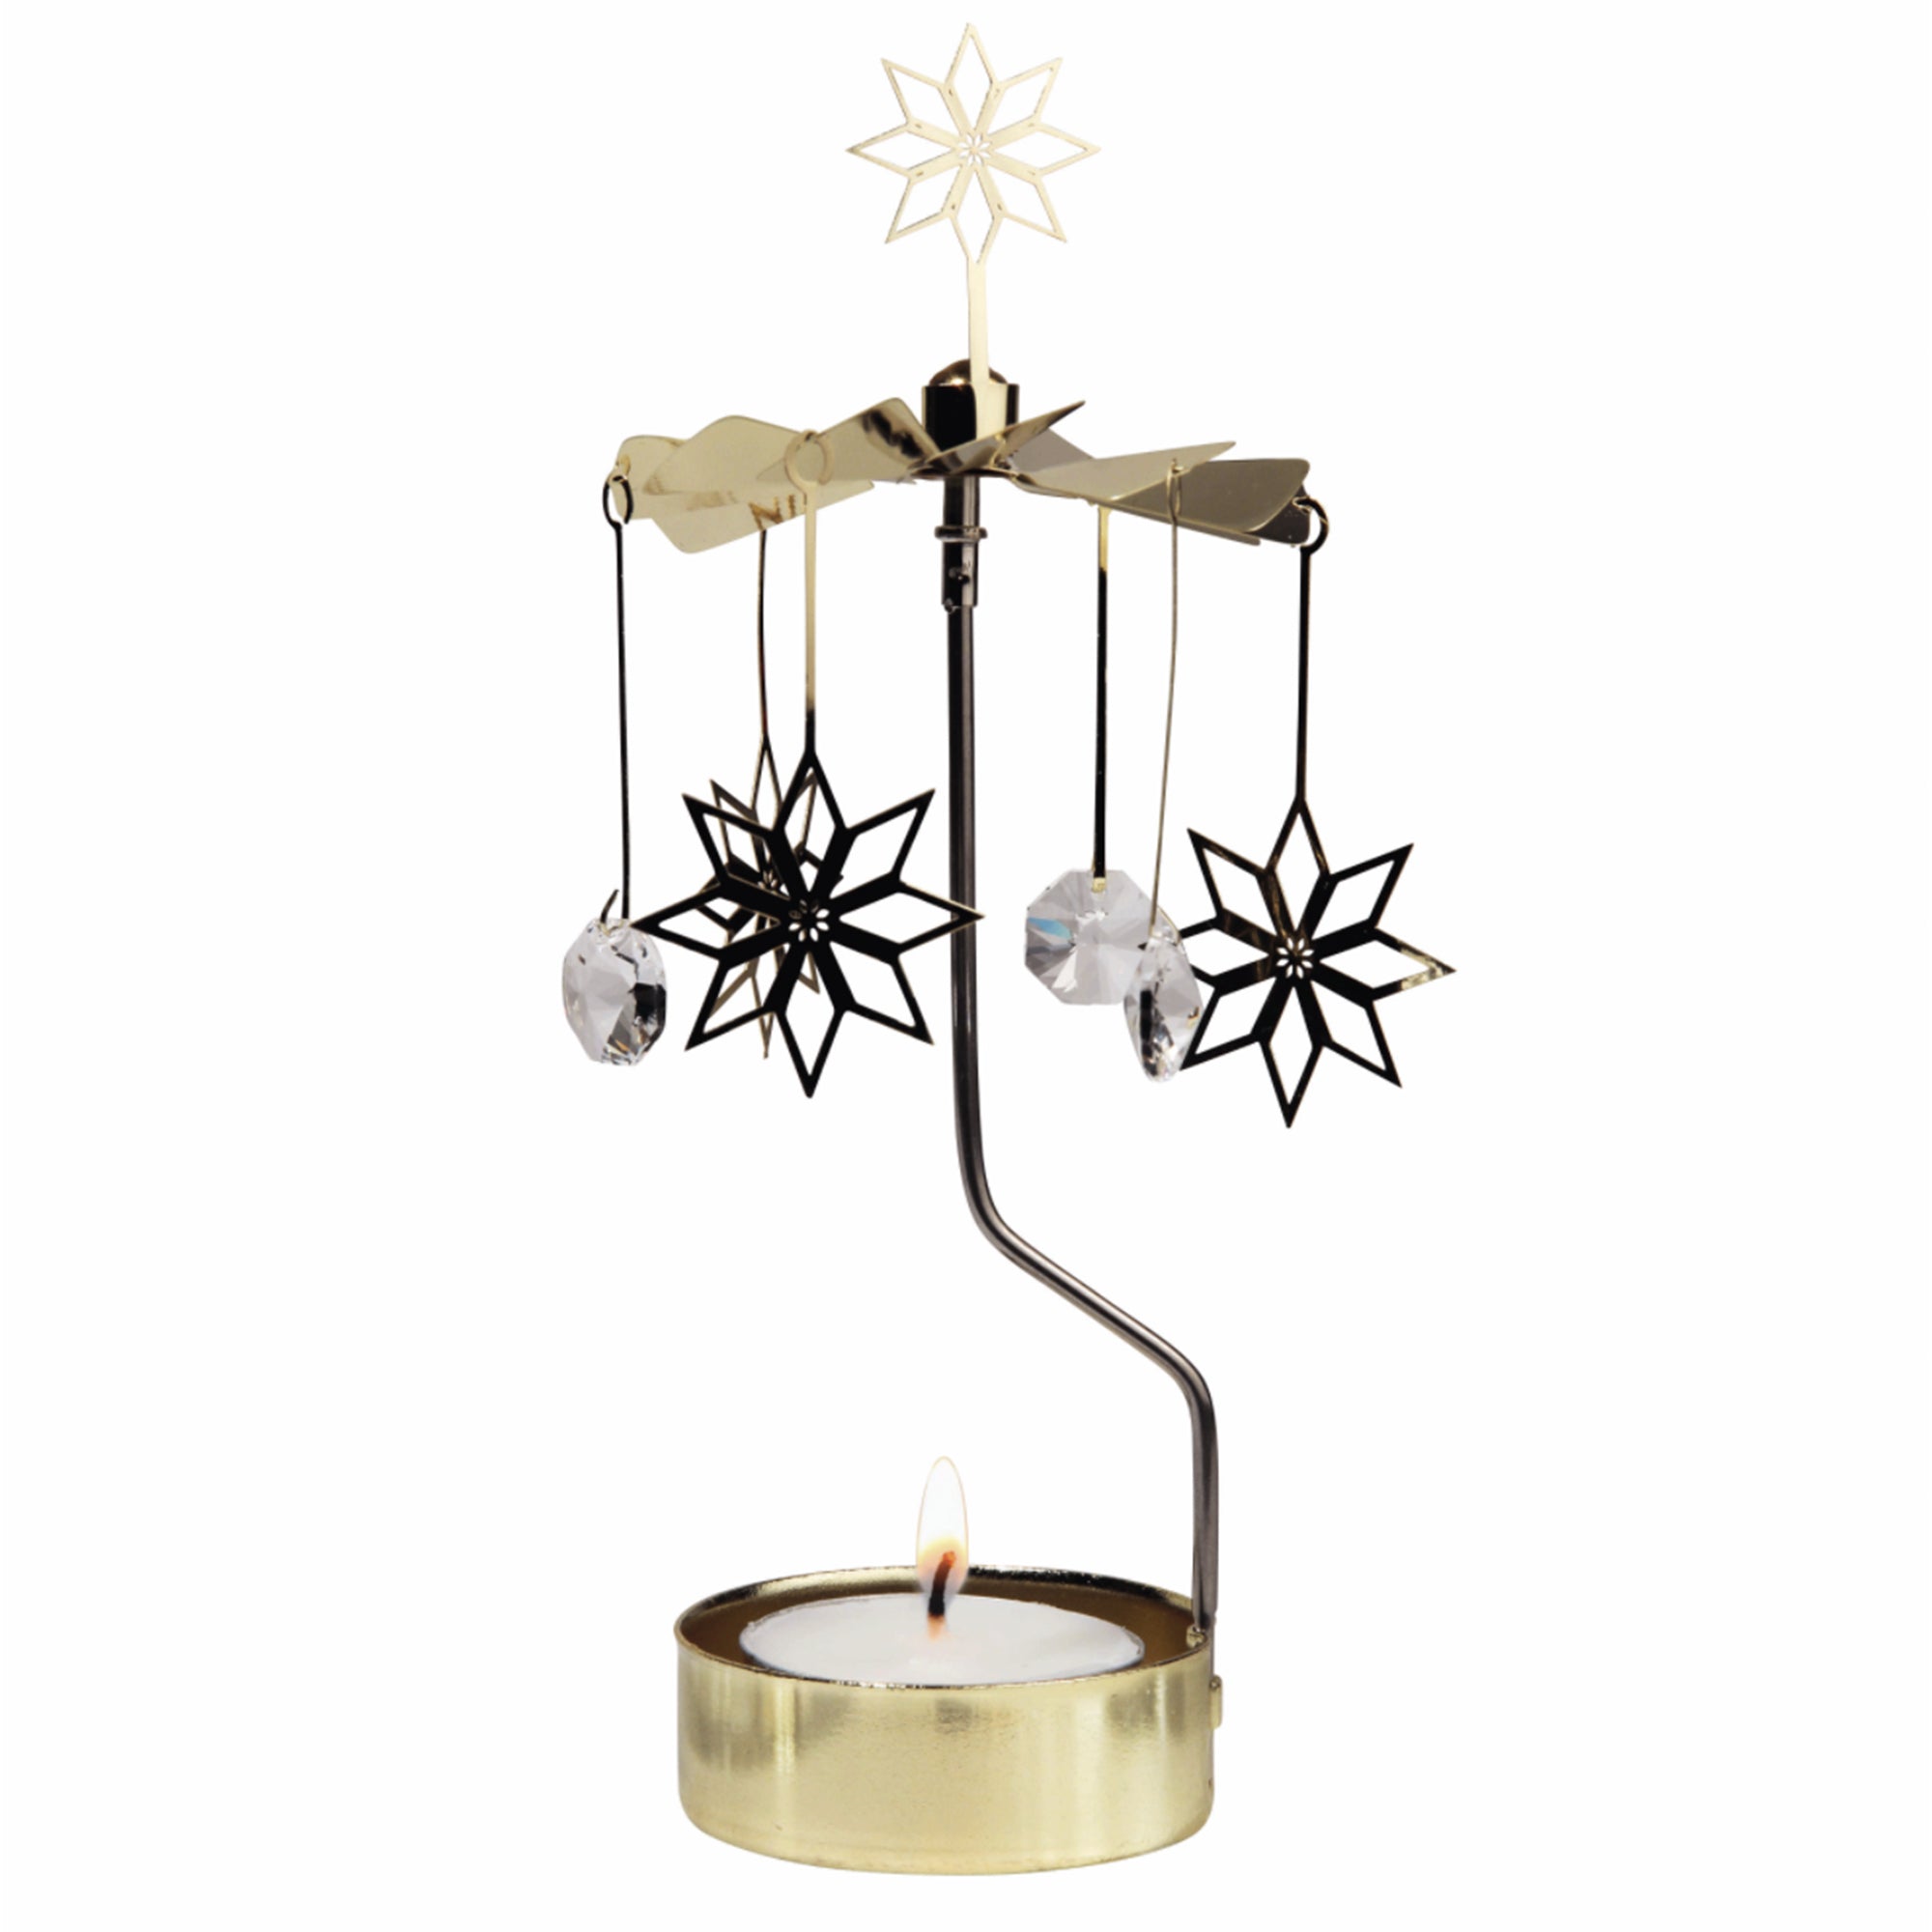 Crystal Star Rotary Candle Holder